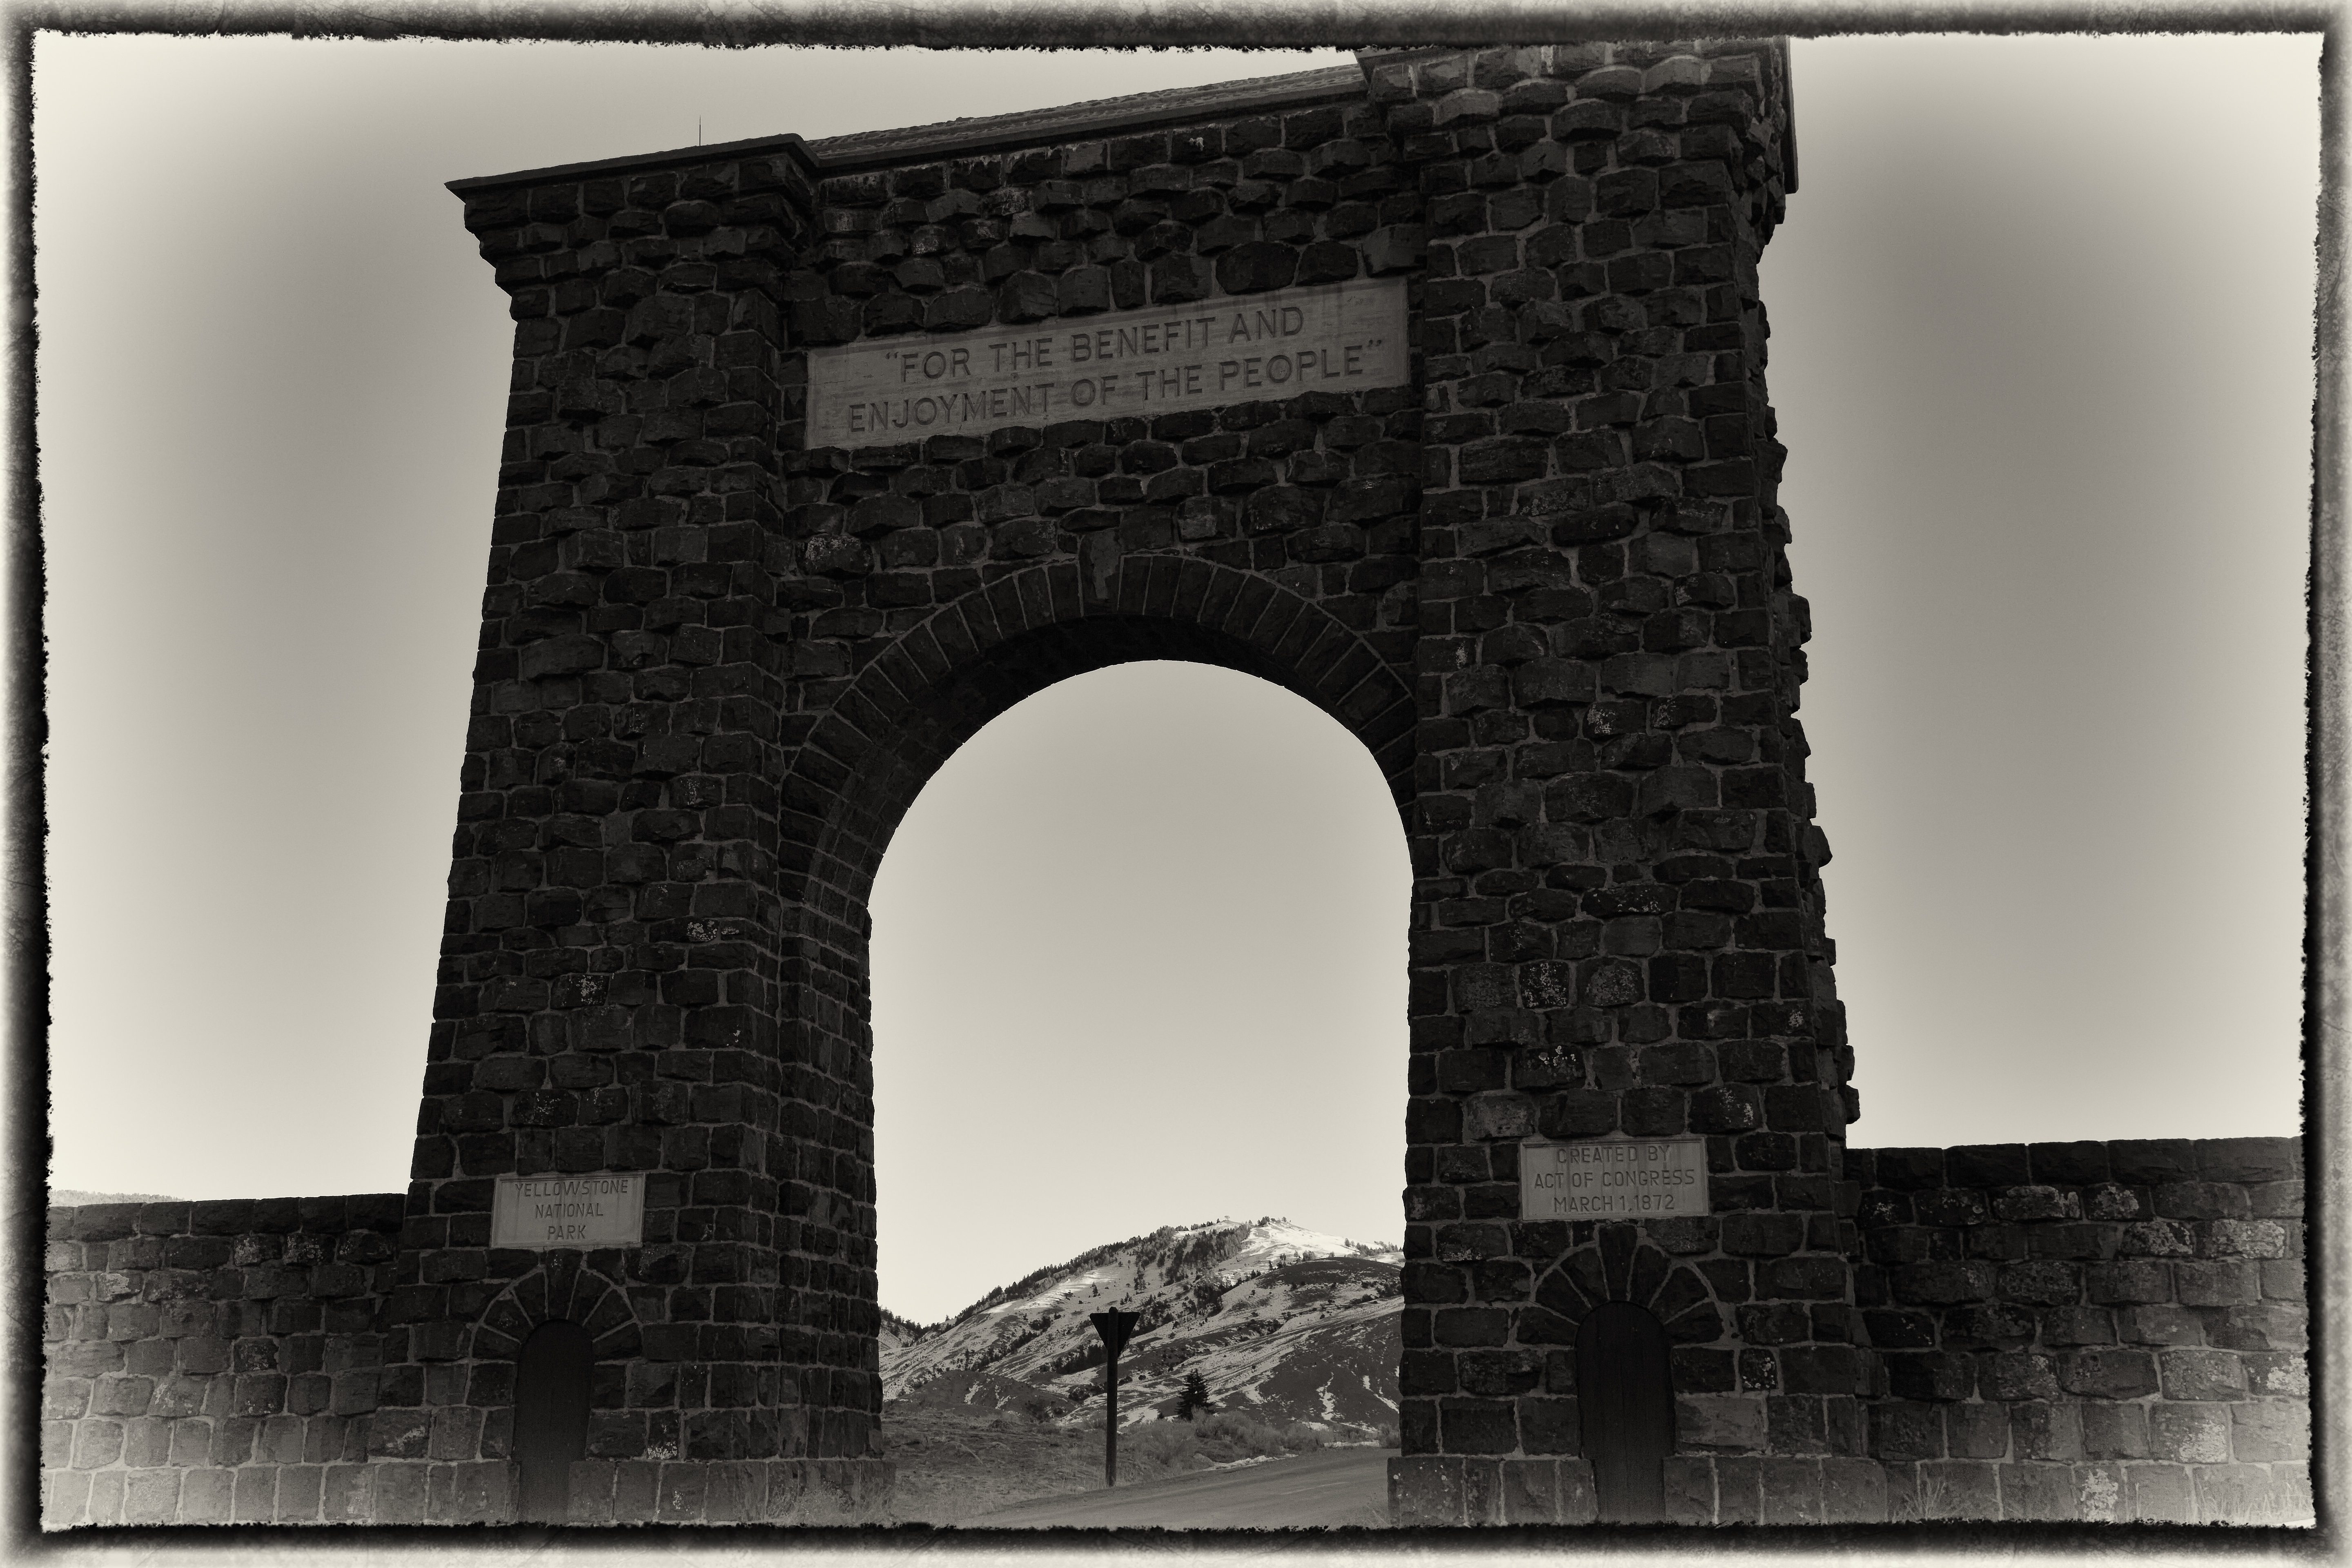 Roosevelt Arch, North Entrance to Yellowstone National Park, Gardiner, MT